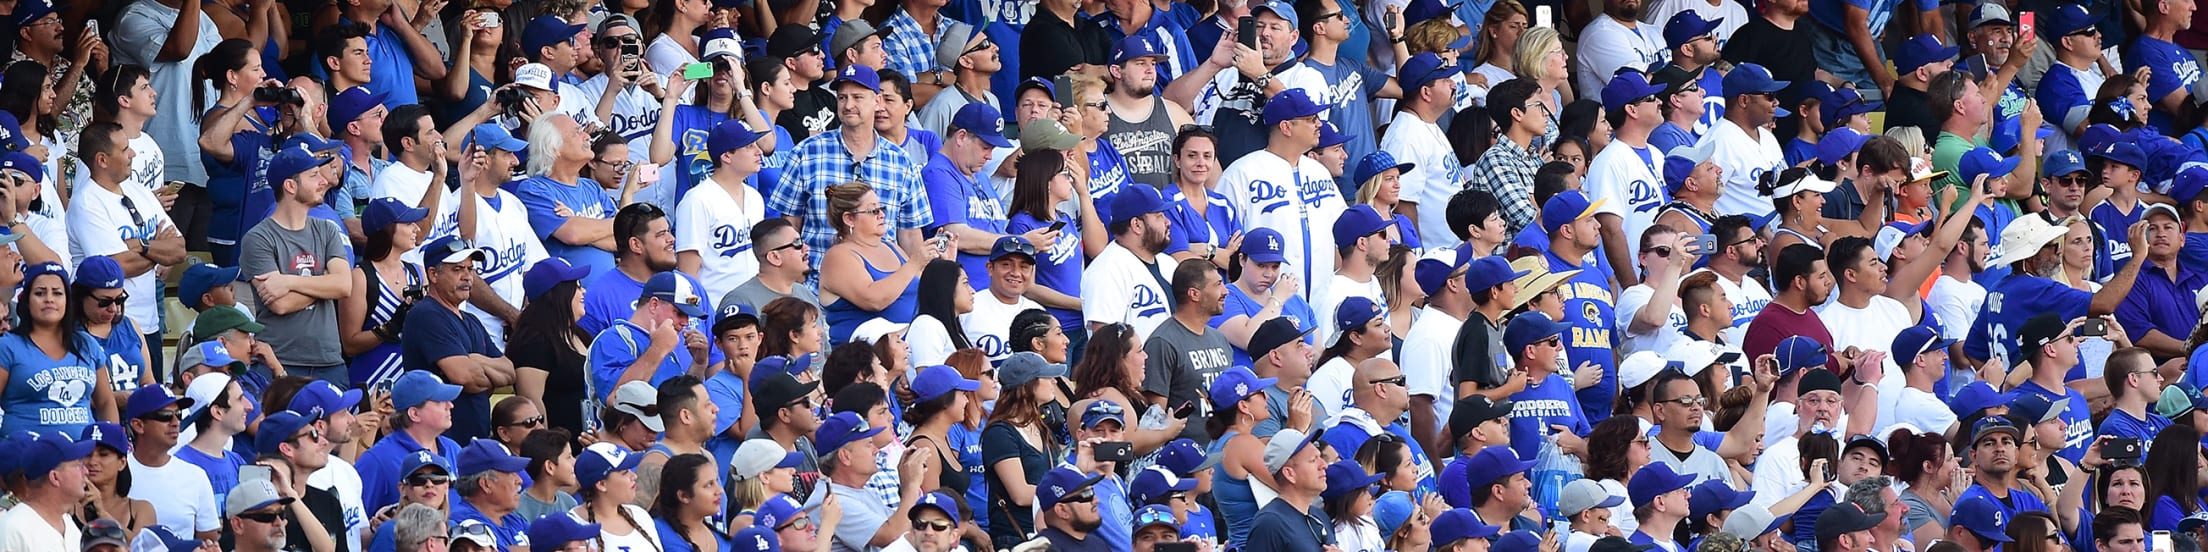 With a Crowd of Diverse Faces, Dodger Stadium Stands Out - The New York  Times